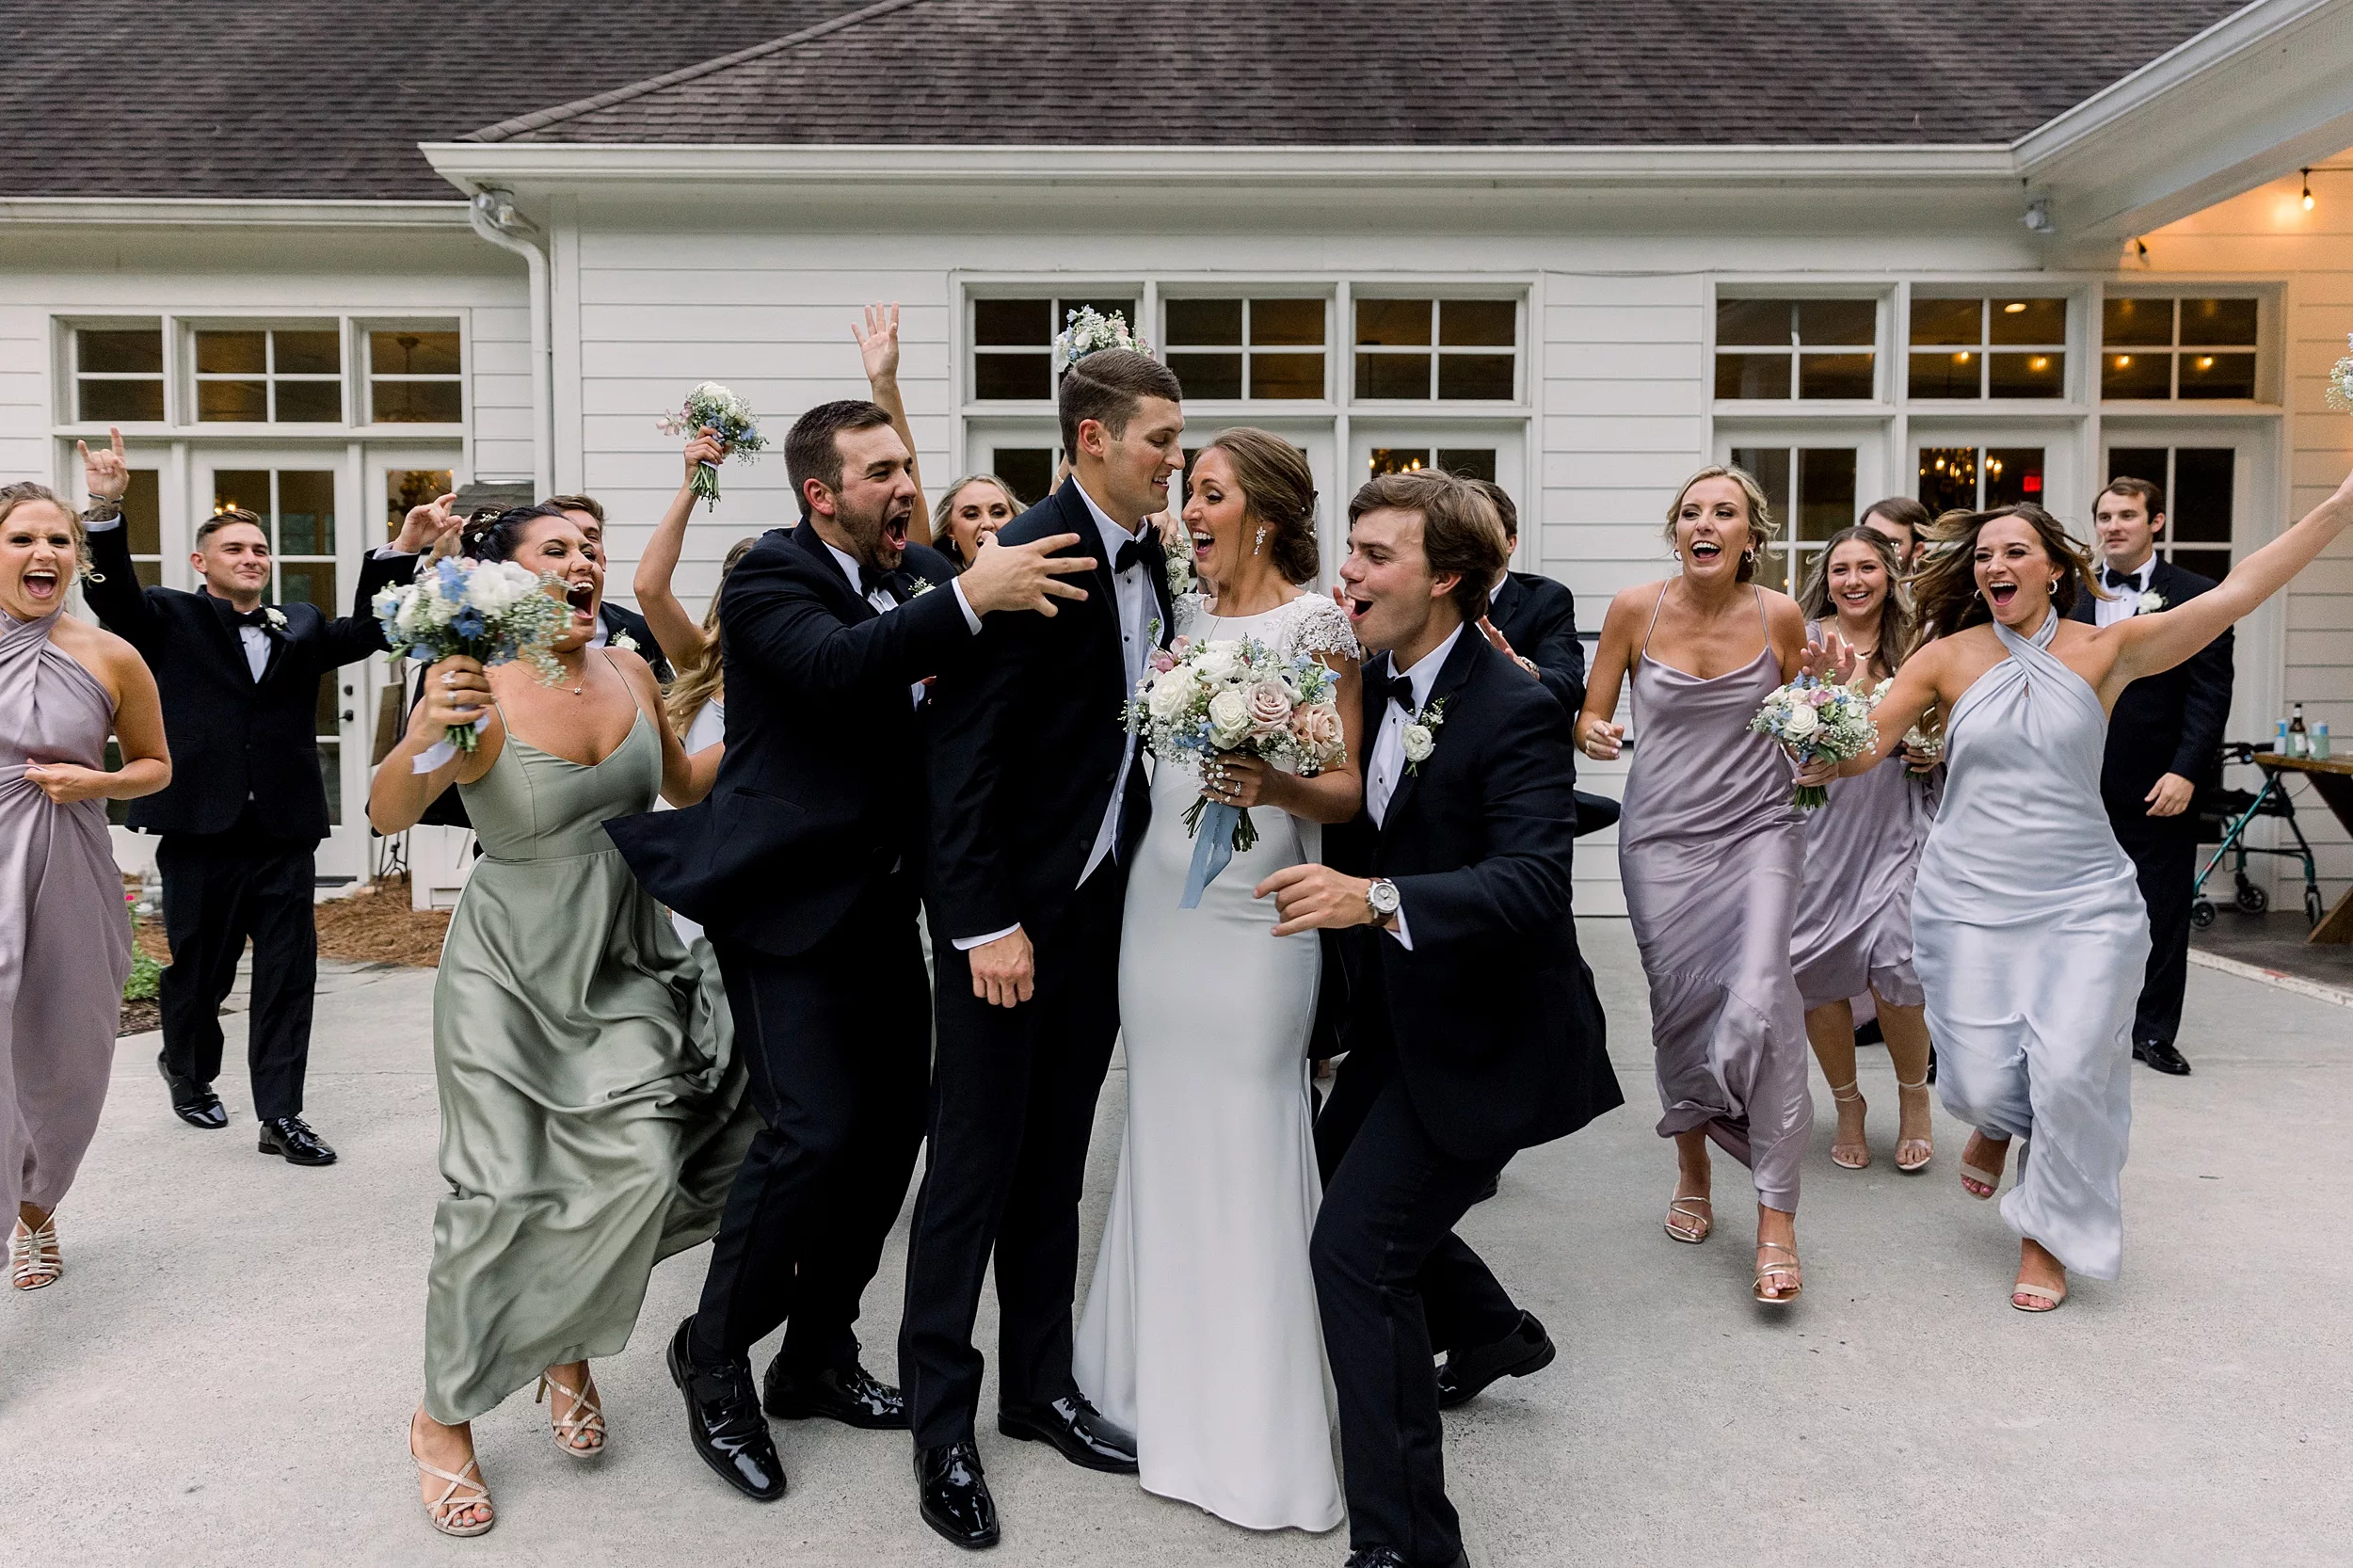 Newlyweds celebrate surrounded by their wedding party on a patio wedding planner vs coordinator